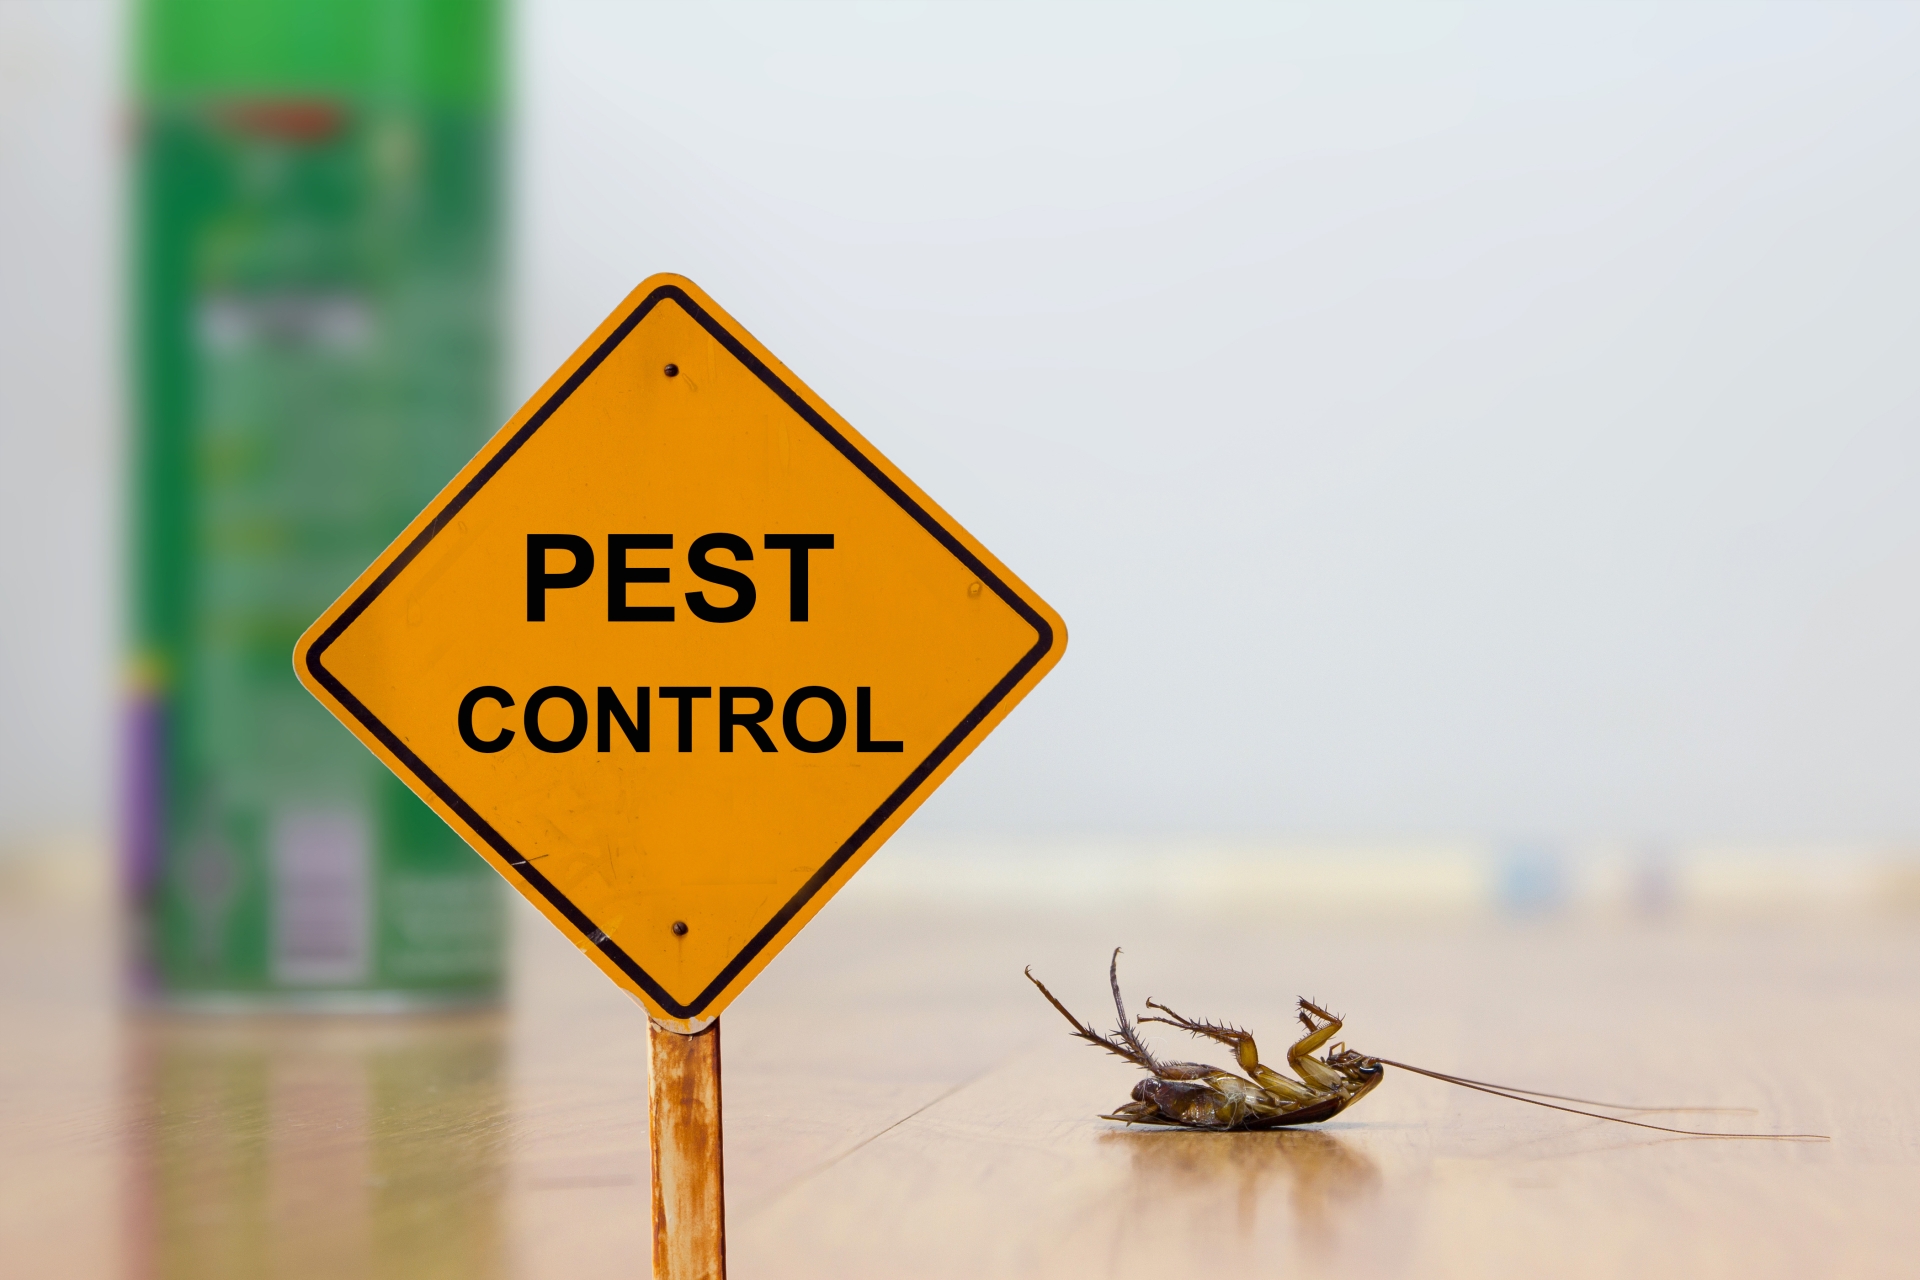 24 Hour Pest Control, Pest Control in Hayes, Harlington, UB3, UB4. Call Now 020 8166 9746